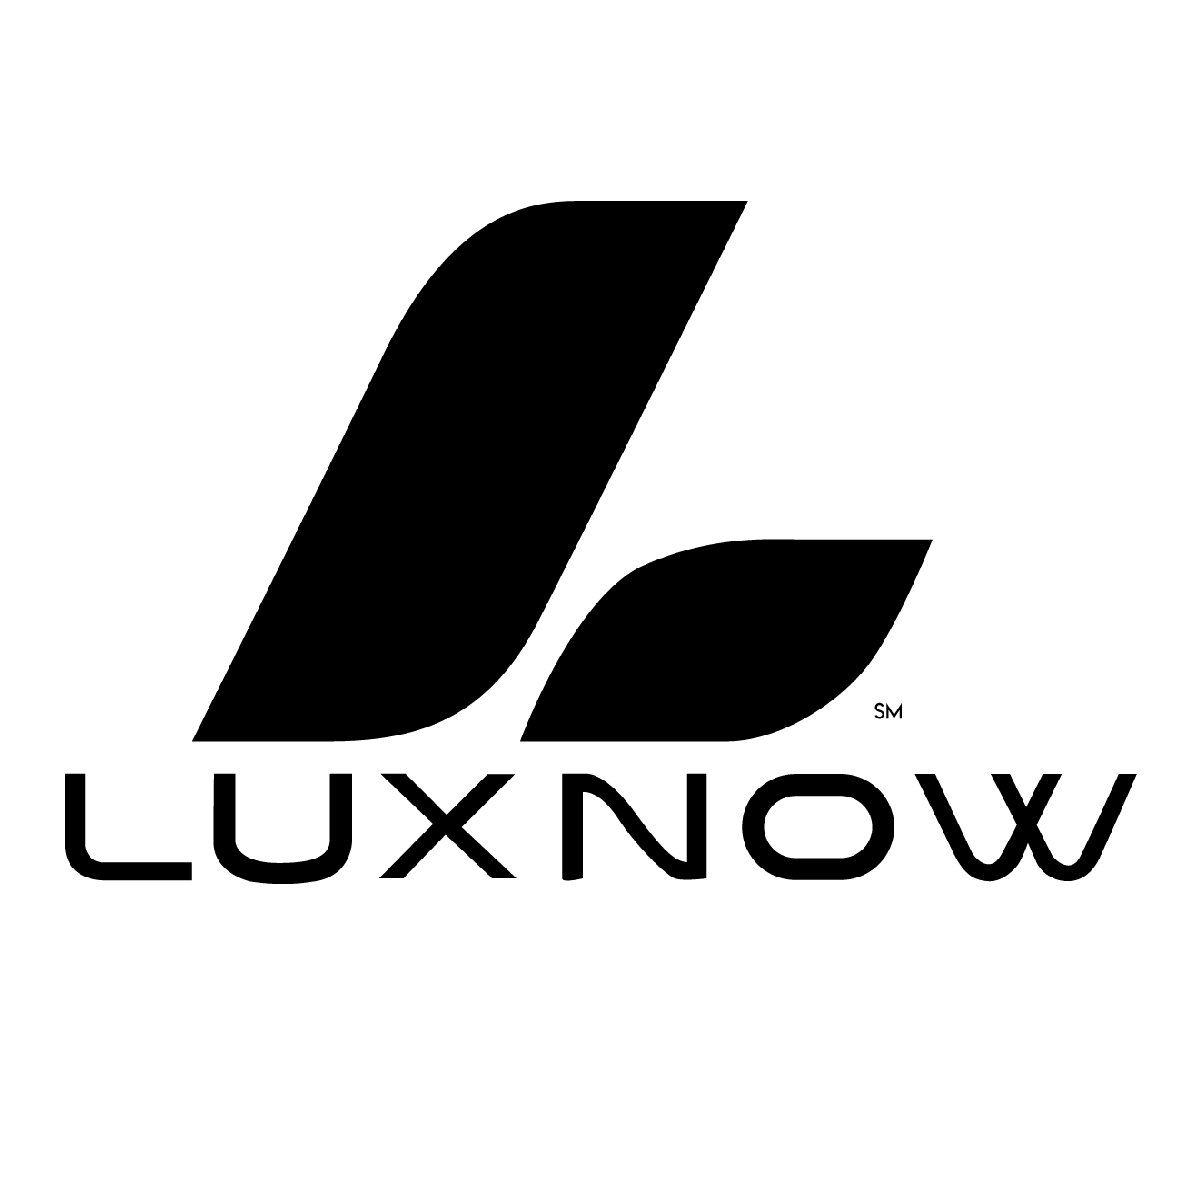 LUXnow